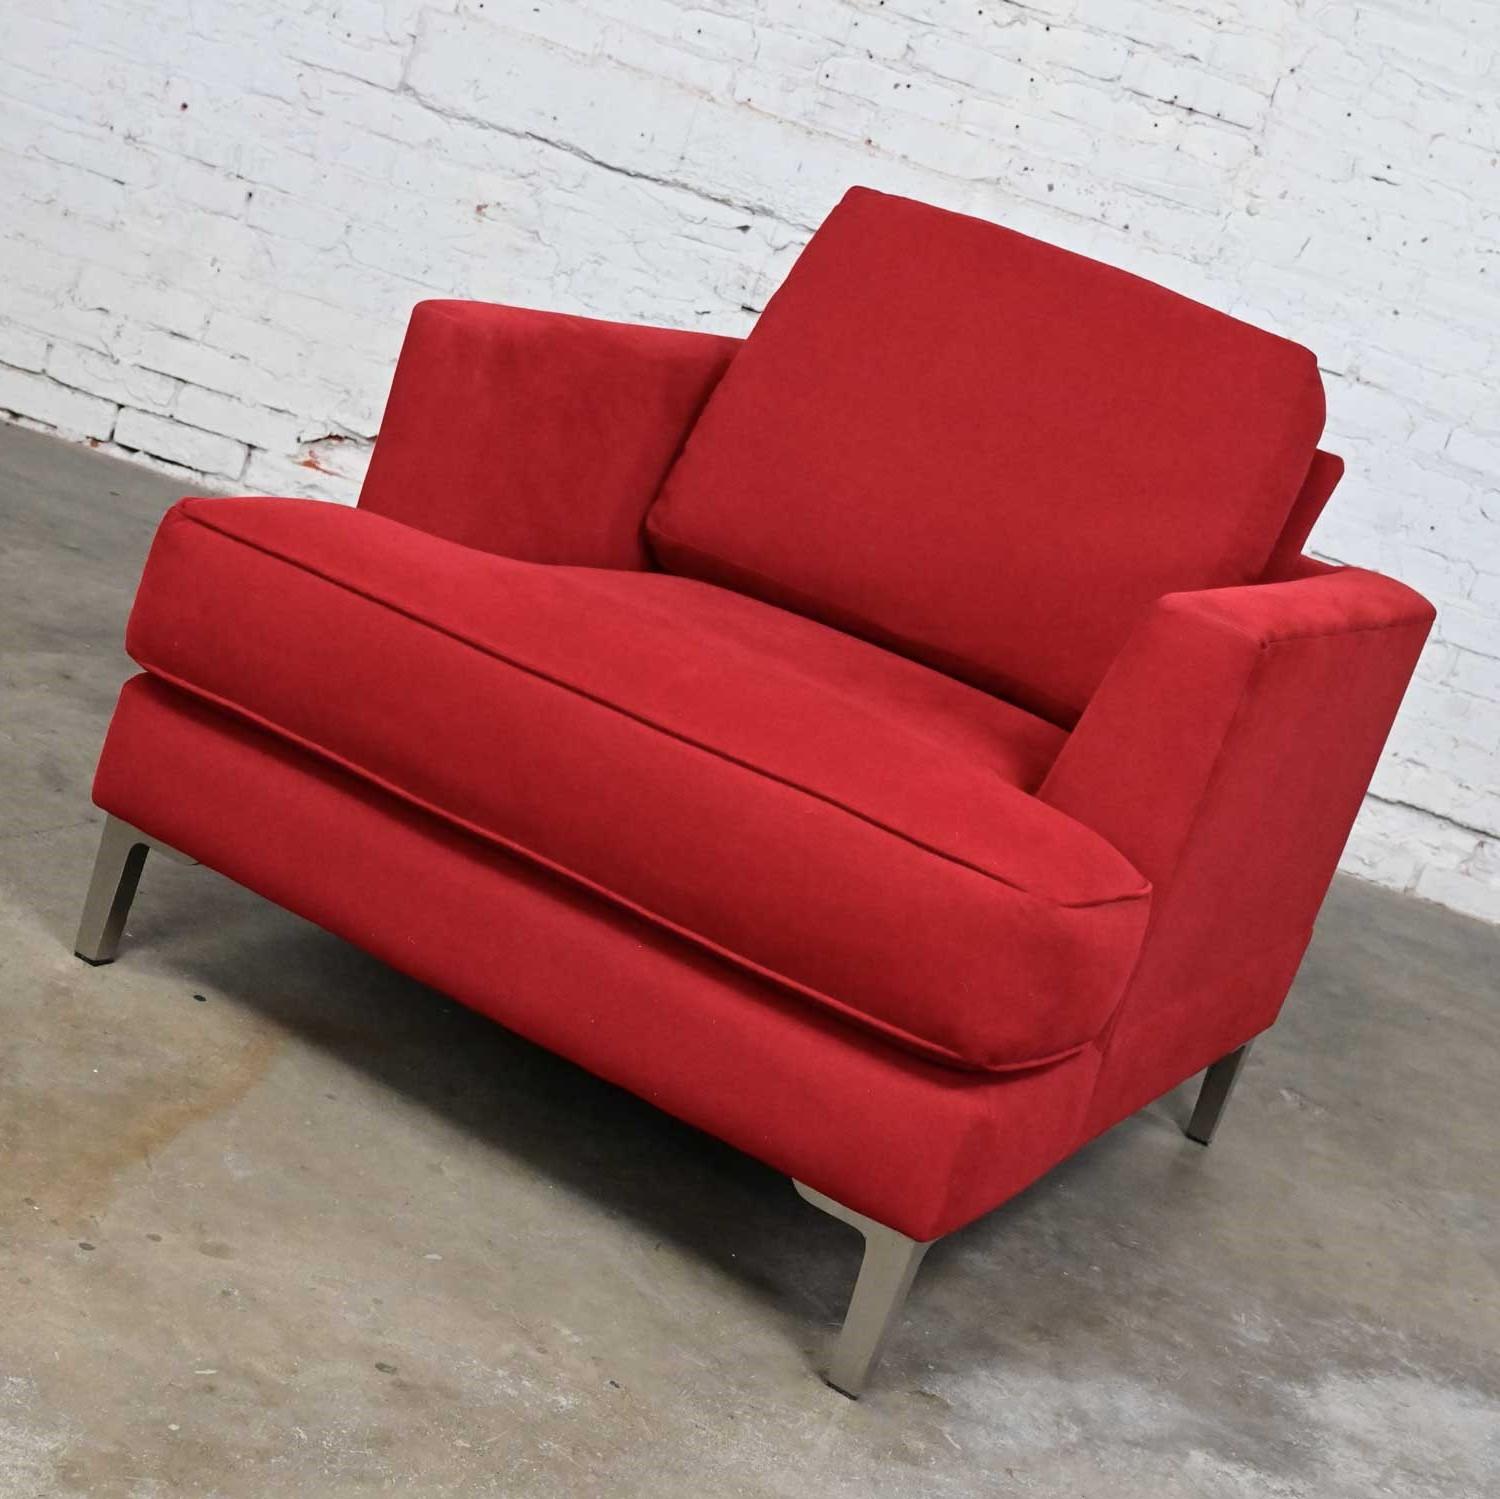 Contemporary Modern Carter Club Chair Attr Zen Collection Bright Red with Polished Steel Legs